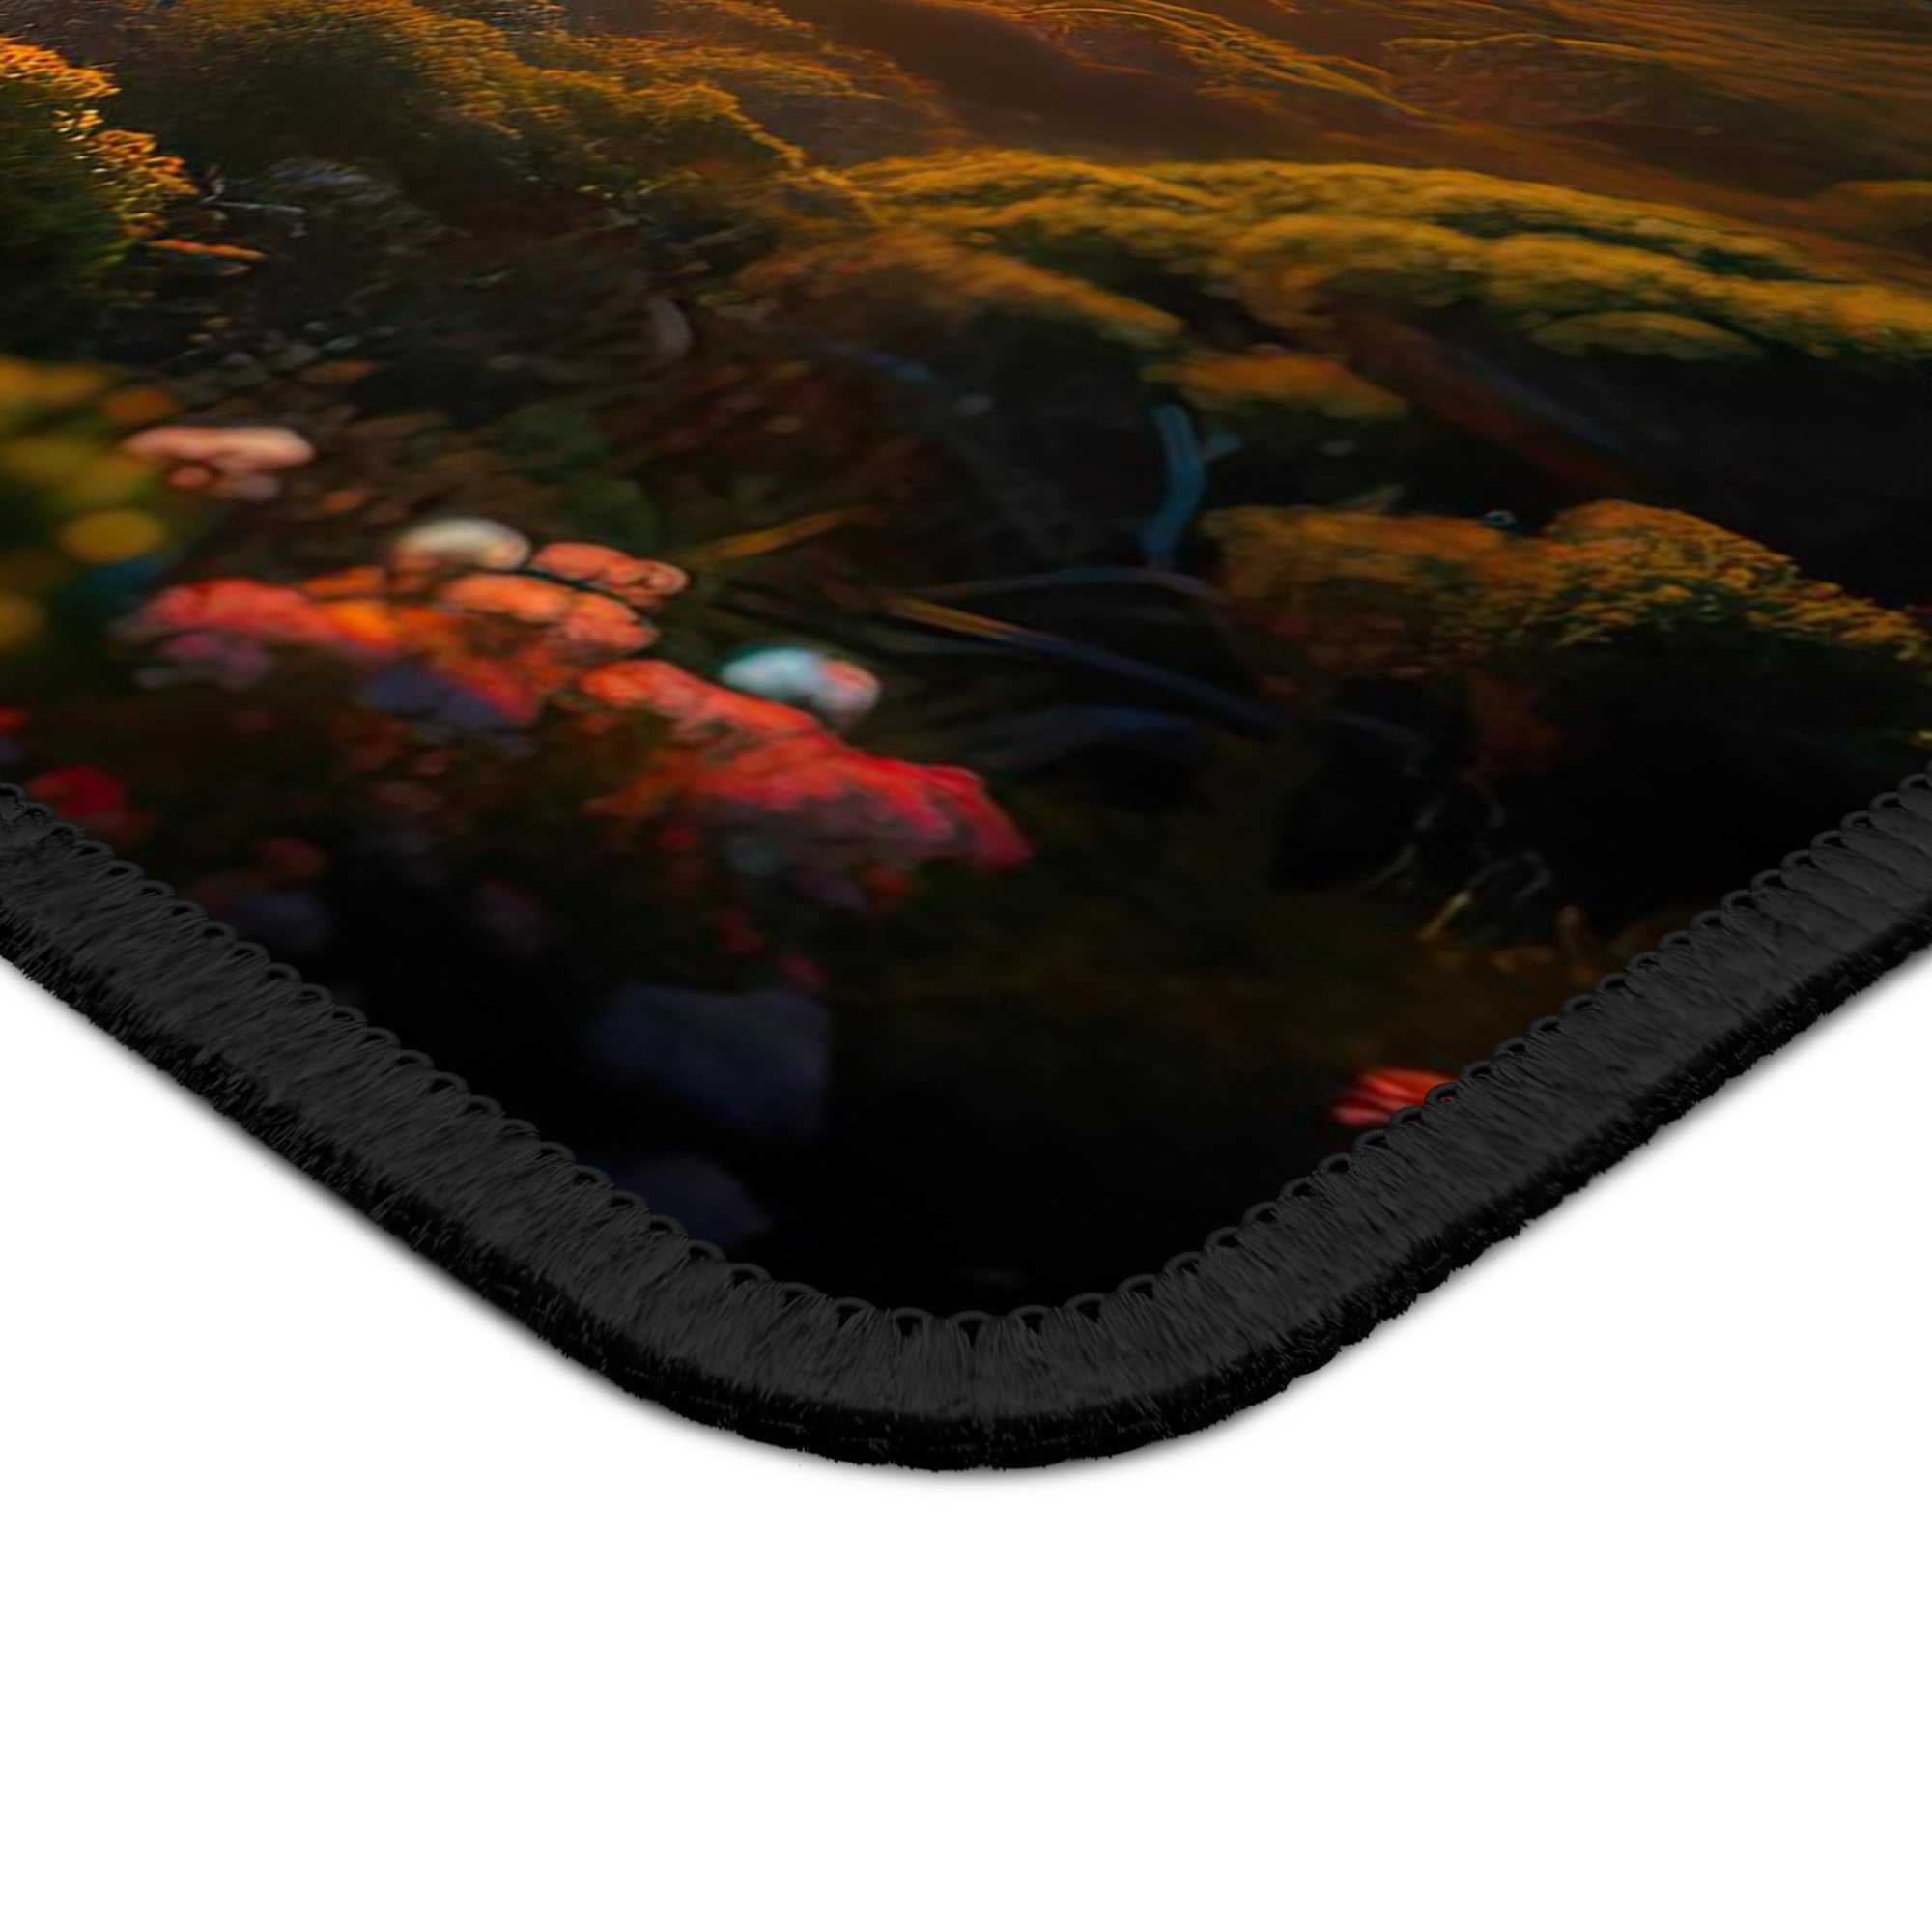 The Cradle of Dawn's First Light Gaming Mouse Pad